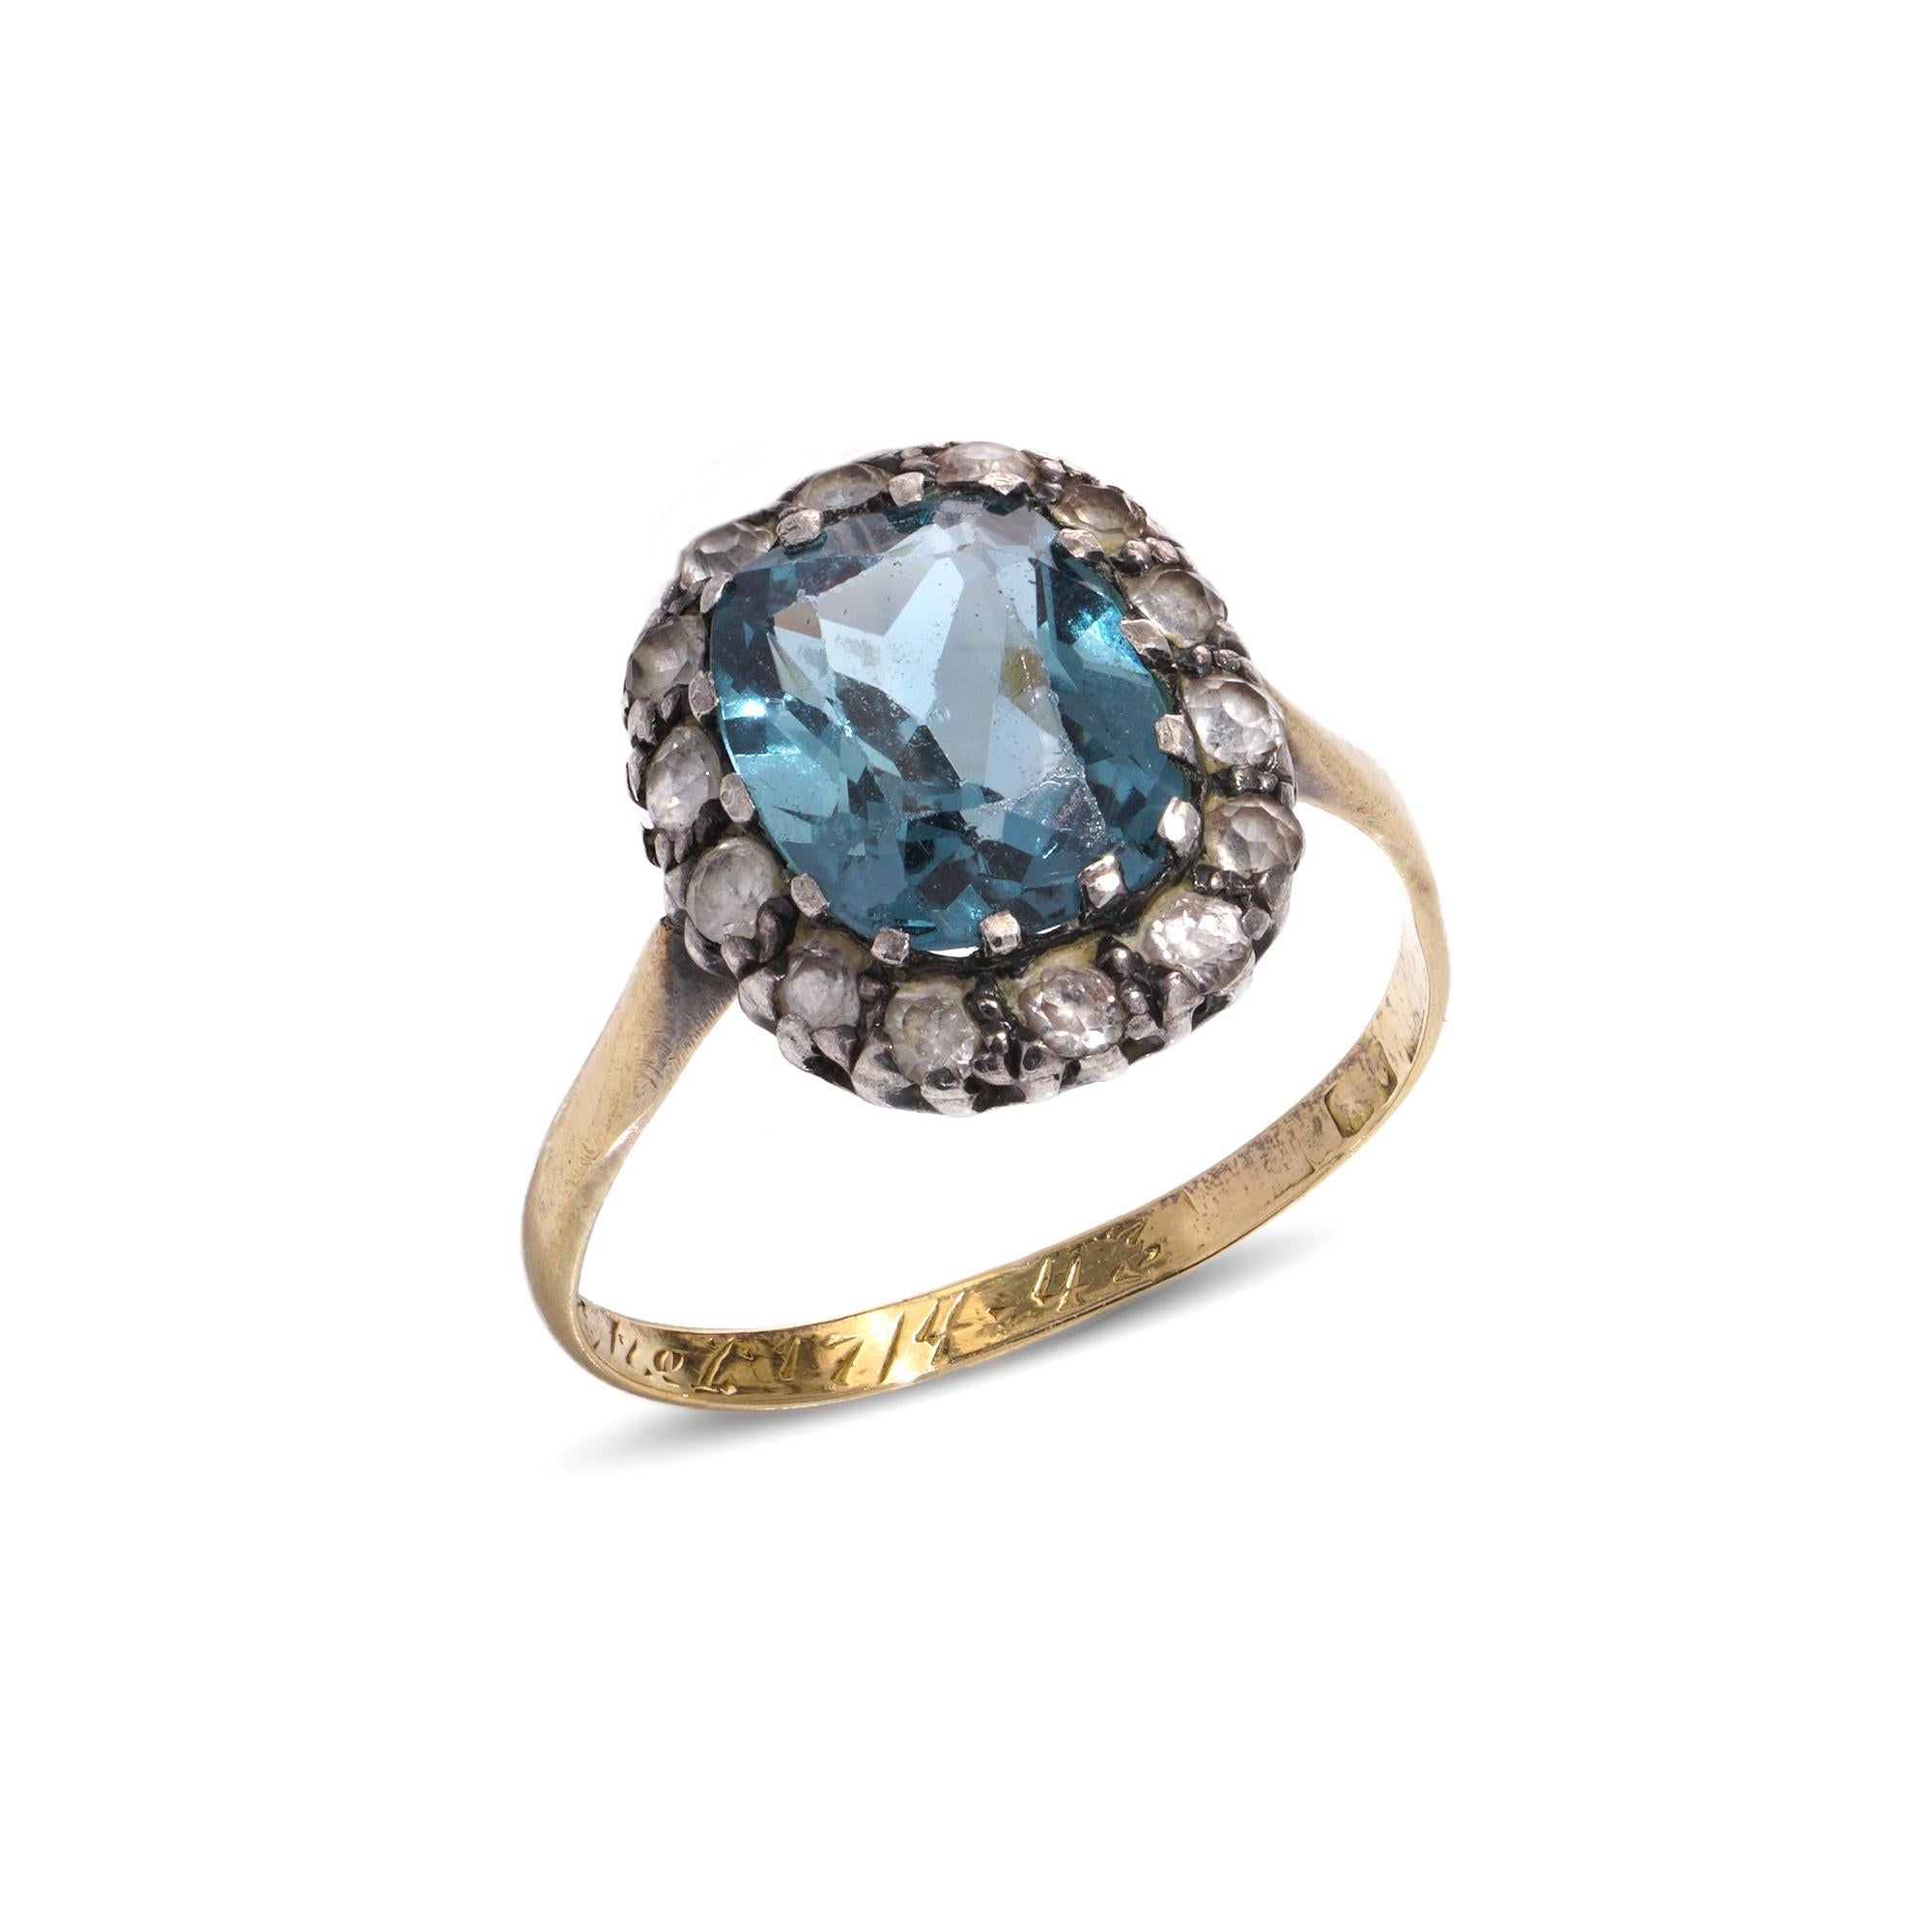 Antique early Georgian 18th Century 18kt yellow gold and silver blue topaz and paste cluster. 
Ring's  Shank has Initials and an inscription 1714 - 43 
Tested positive for 18kt gold and silver.

Dimensions - 
Finger Size (UK) = L (EU) = 53 (US) =